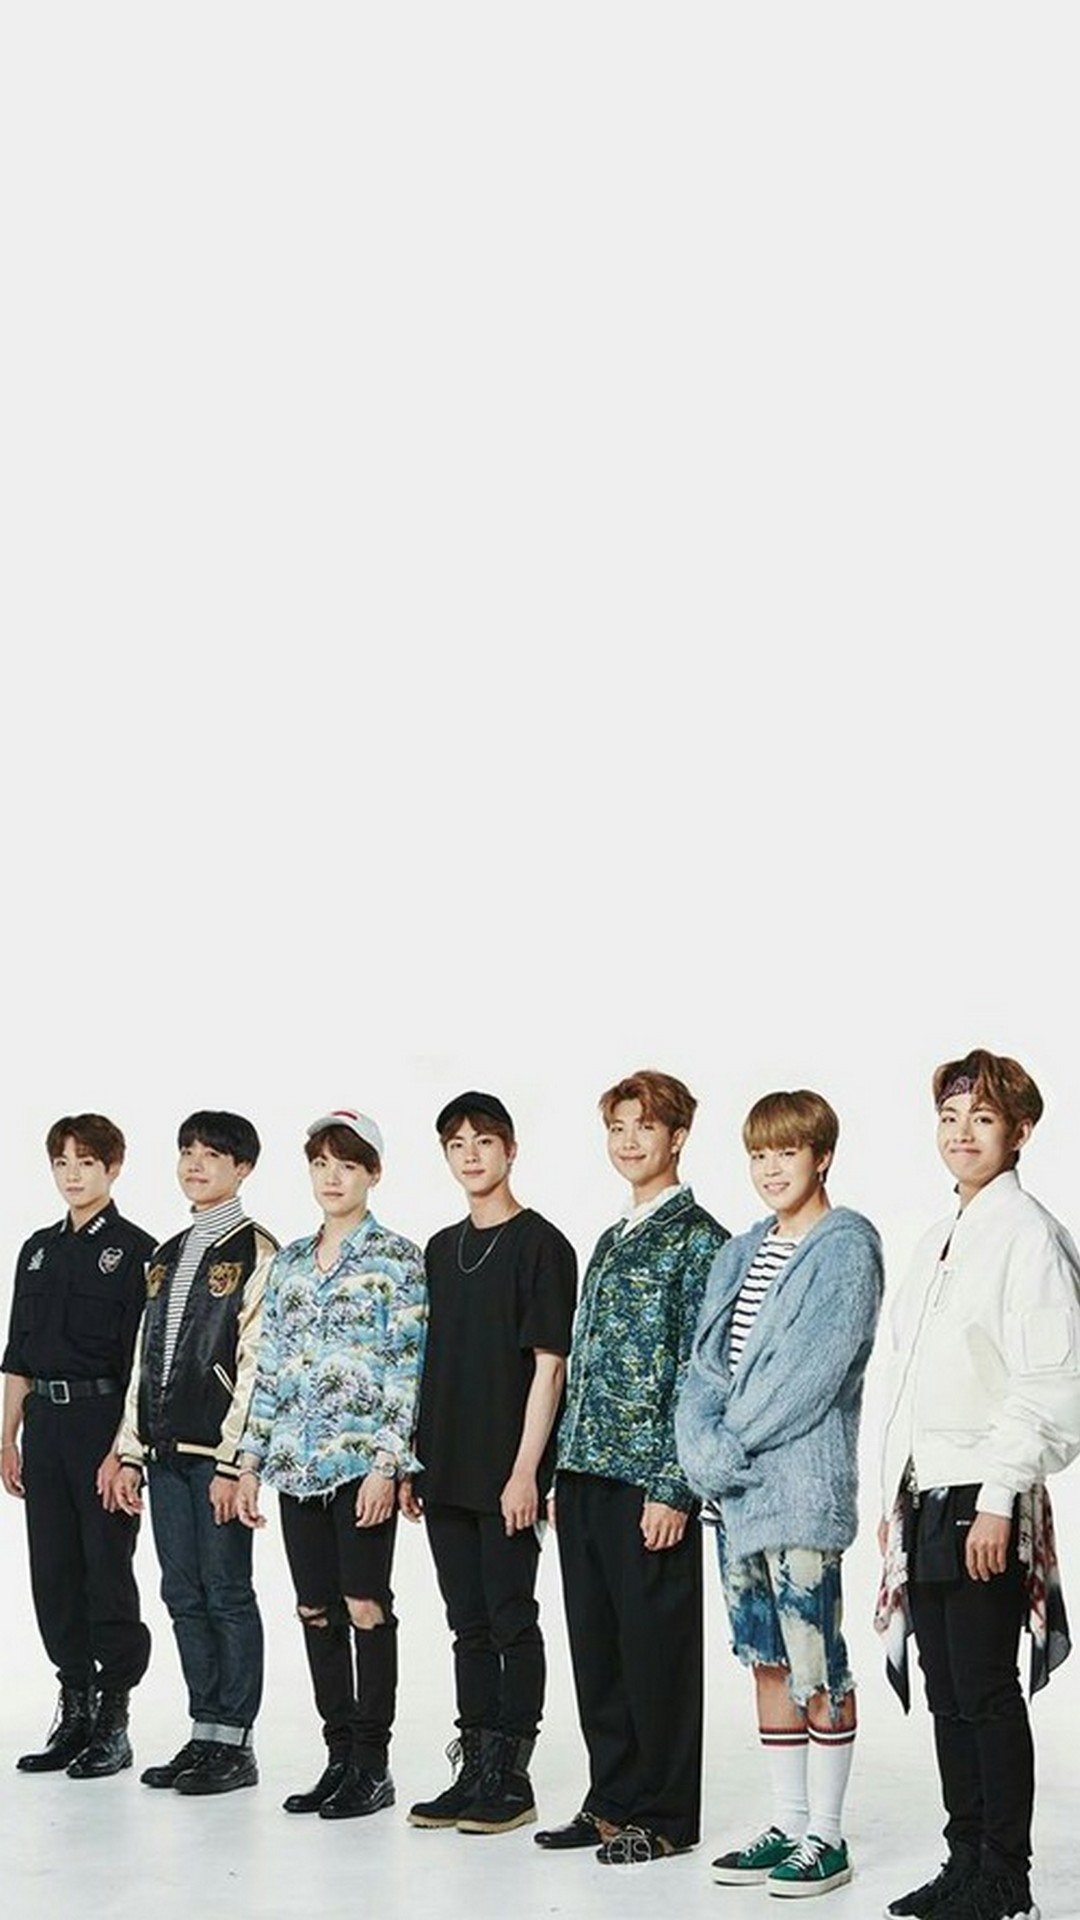 Wallpaper iPhone BTS With high-resolution 1080X1920 pixel. You can use this wallpaper for your Windows and Mac OS computers as well as your Android and iPhone smartphones